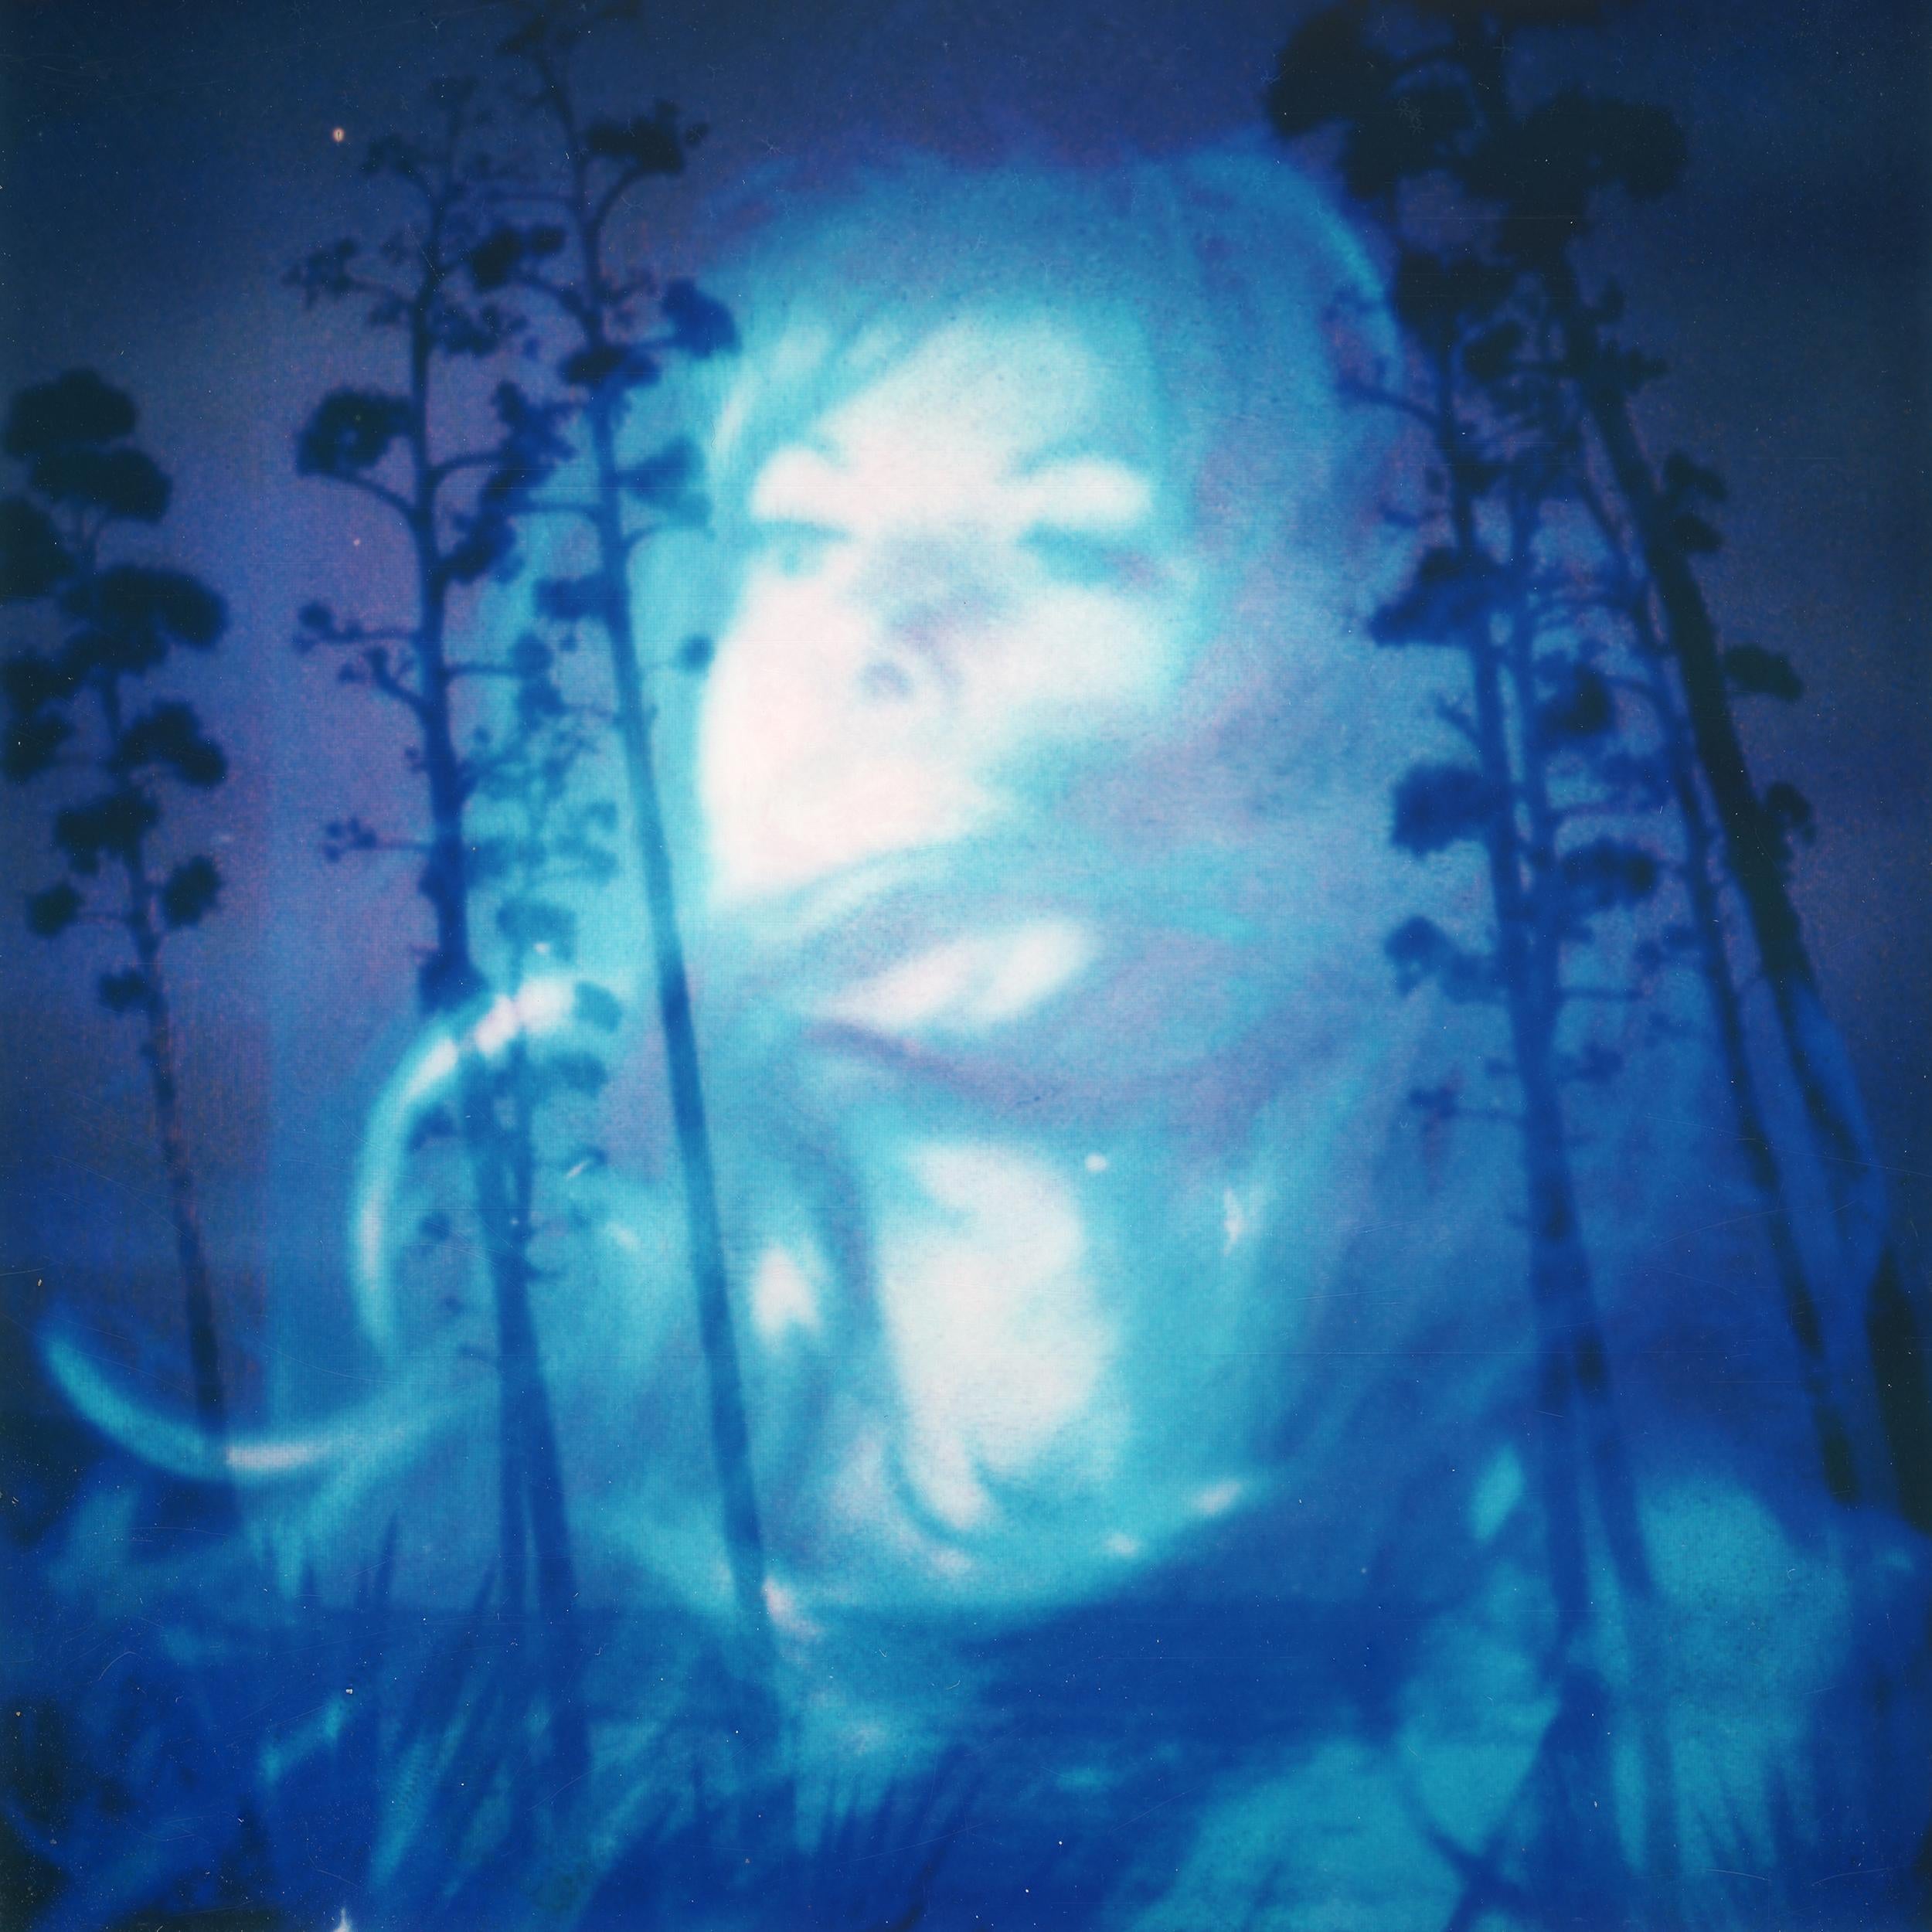 Clare Marie Bailey Color Photograph - The Night Homes a Heart - Contemporary, Polaroid, Woman, 21st Century